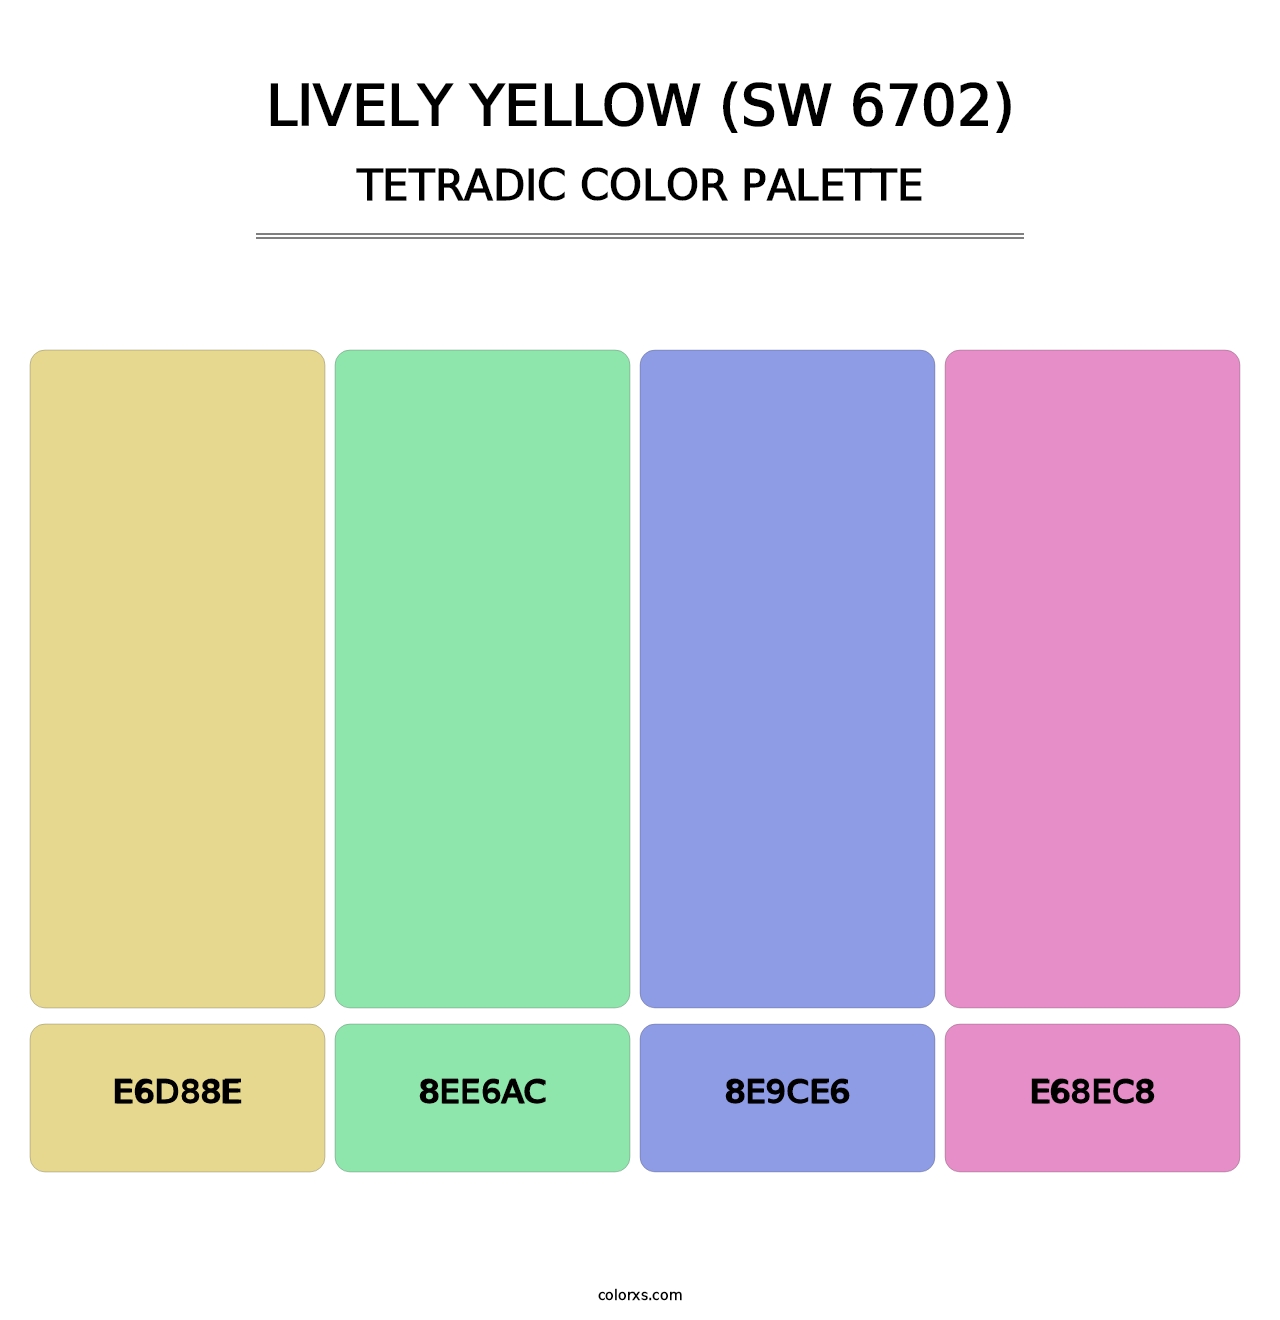 Lively Yellow (SW 6702) - Tetradic Color Palette